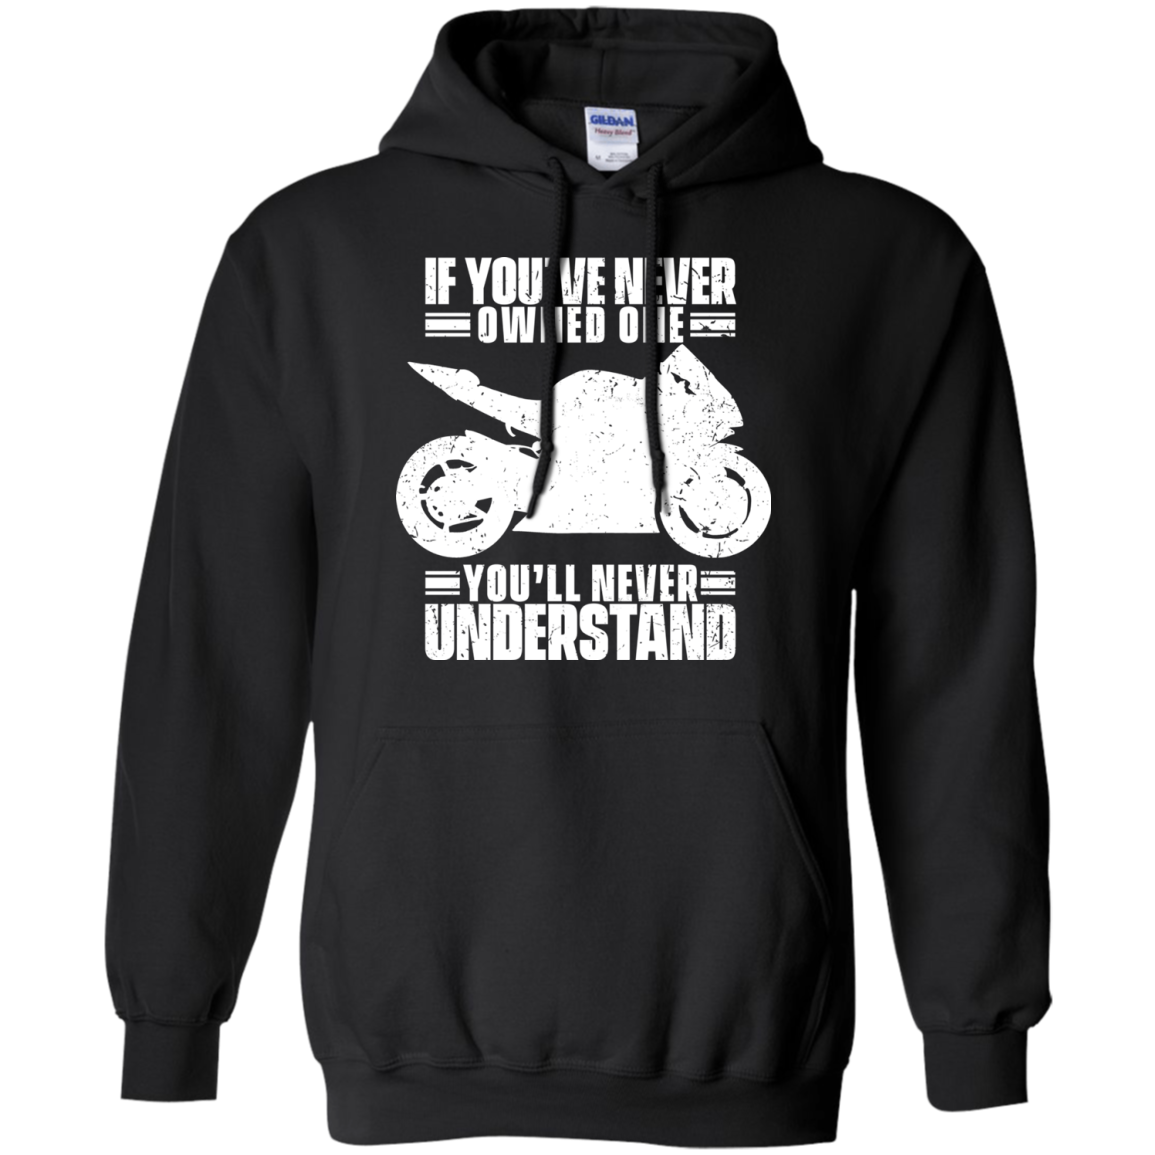 You'll Never Understand Hoodie Black Small Medium Large X-Large XX-Large XXX-Large 4XL 5XL 6XL